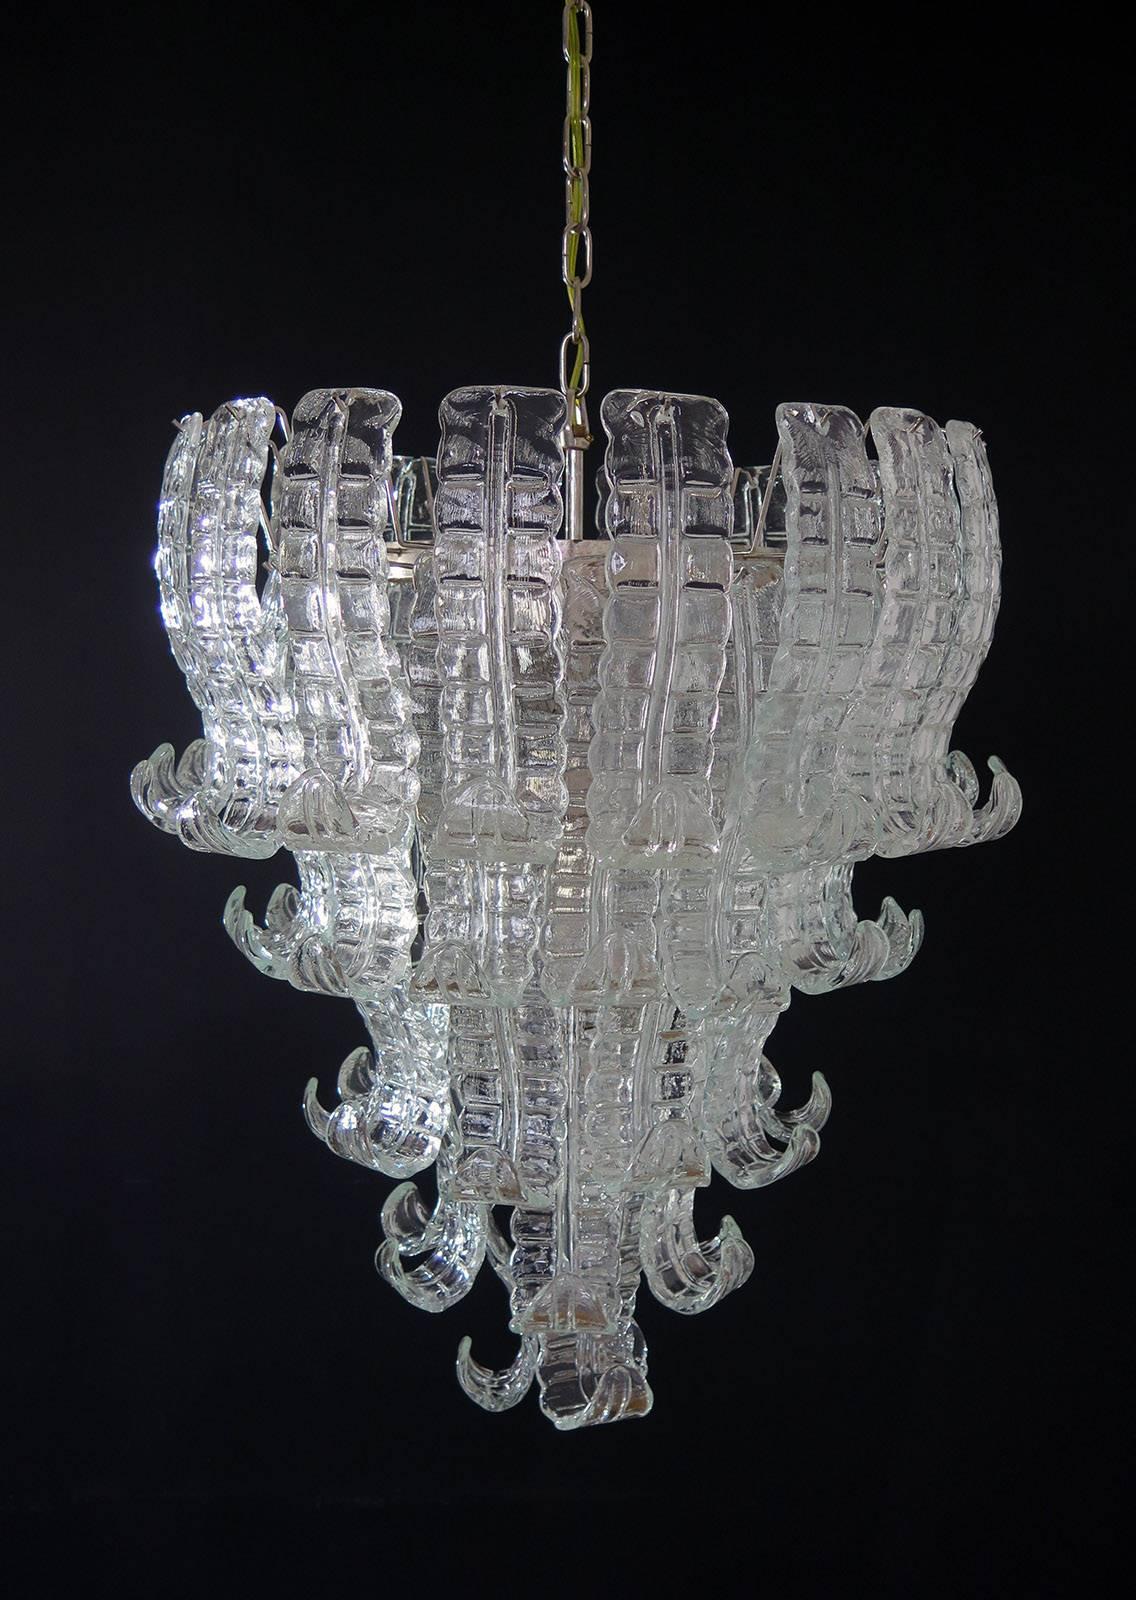 Beautiful and huge Italian Murano chandelier composed of 52 splendid trasparent glasses that give a very elegant look
Period: 1970s
Dimensions: 55.10 inches (140 cm) height with chain; 31.50 inches (80 cm) height without chain; 27.55 inches (70